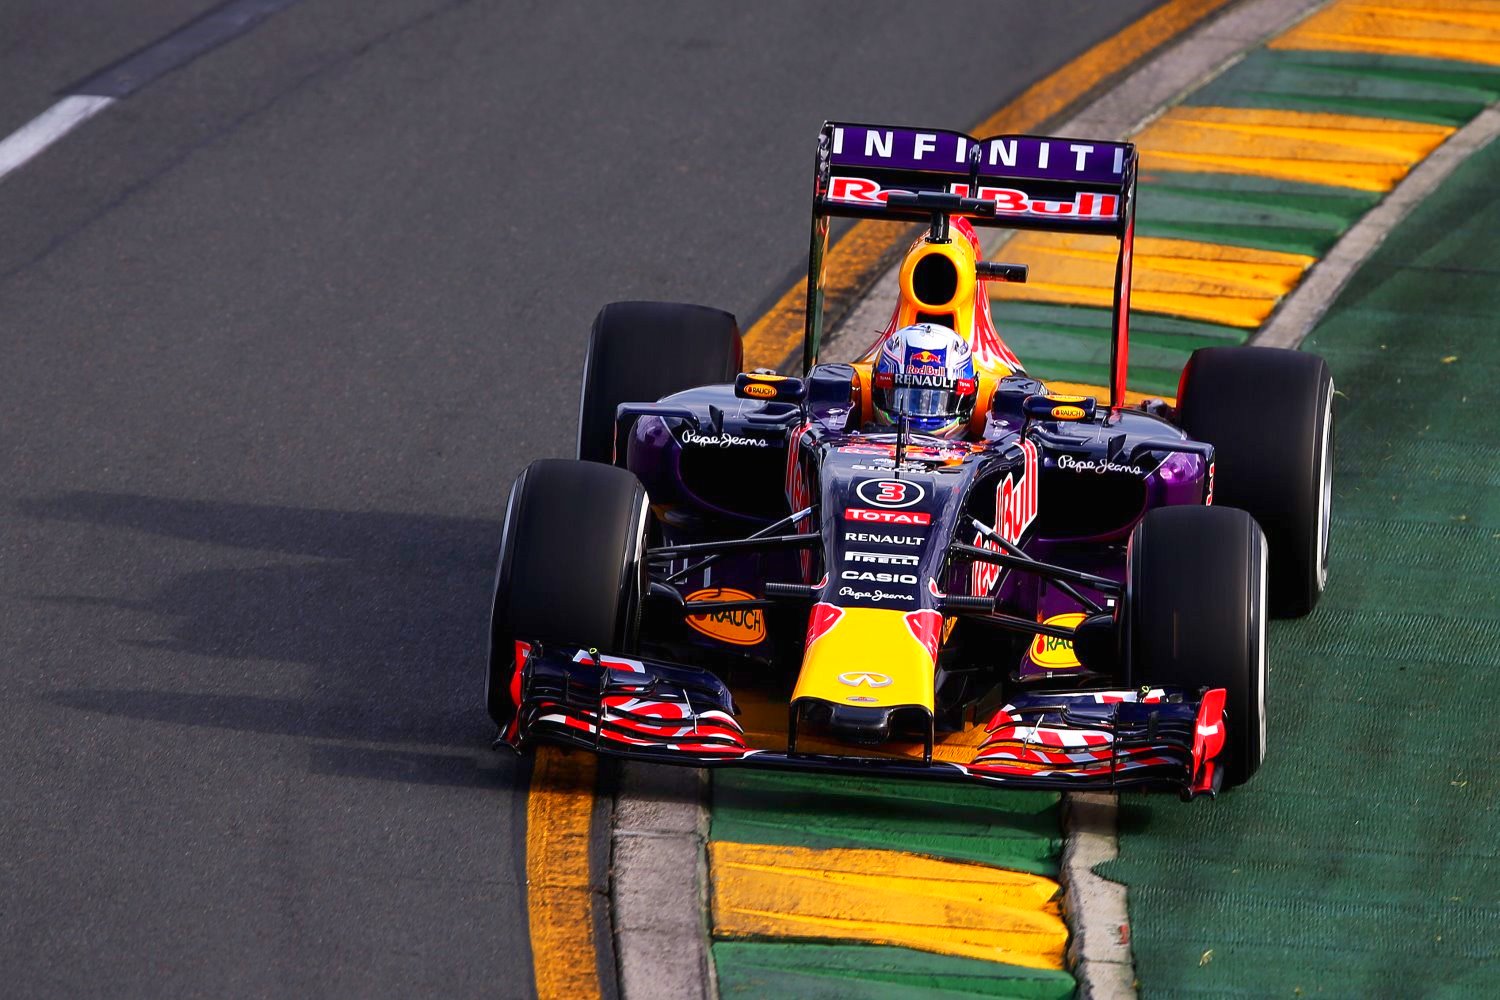 What good will the short nose be for Red Bull if the Renault engine keeps failing?